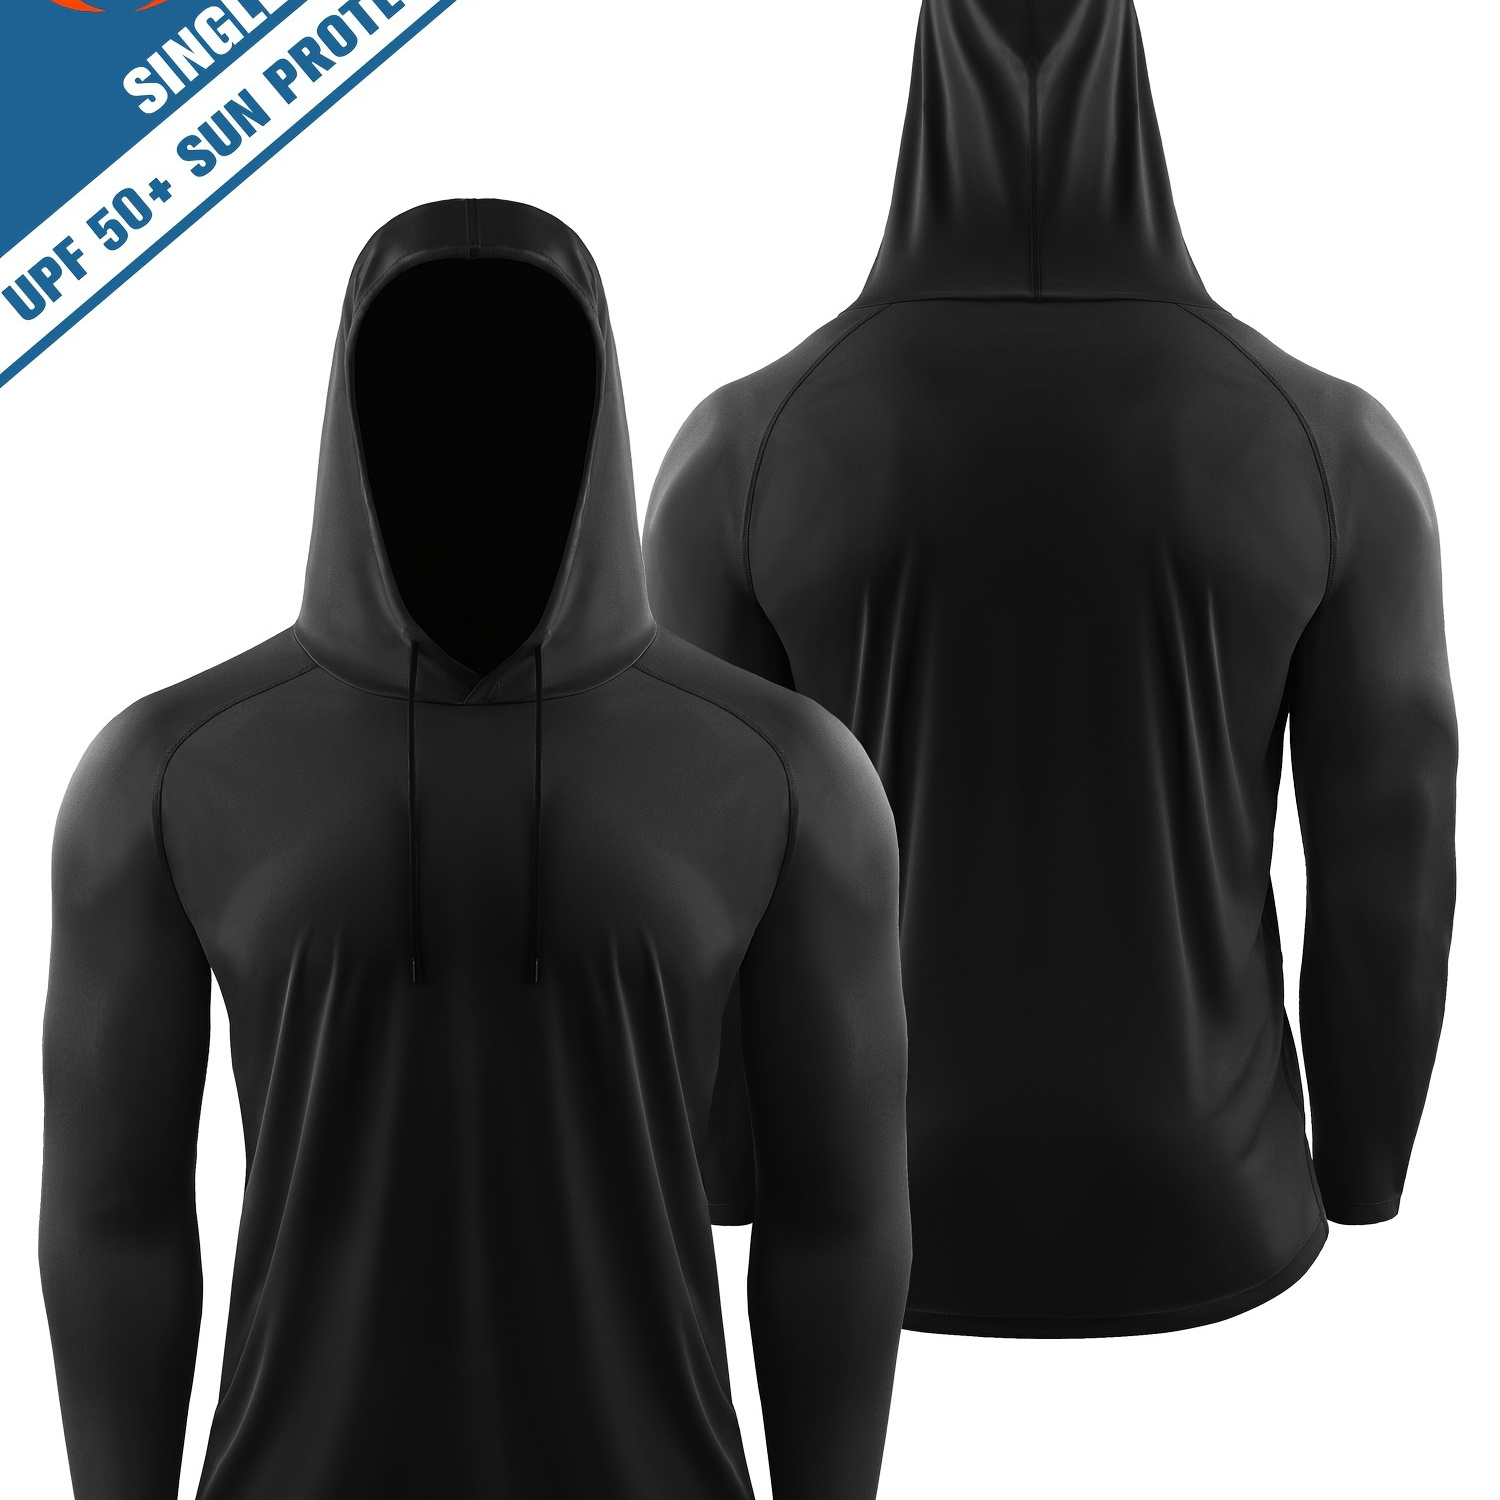 UPF 50+ Men's Hooded Athletic Shirt For Sun Protection During Outdoor  Activities